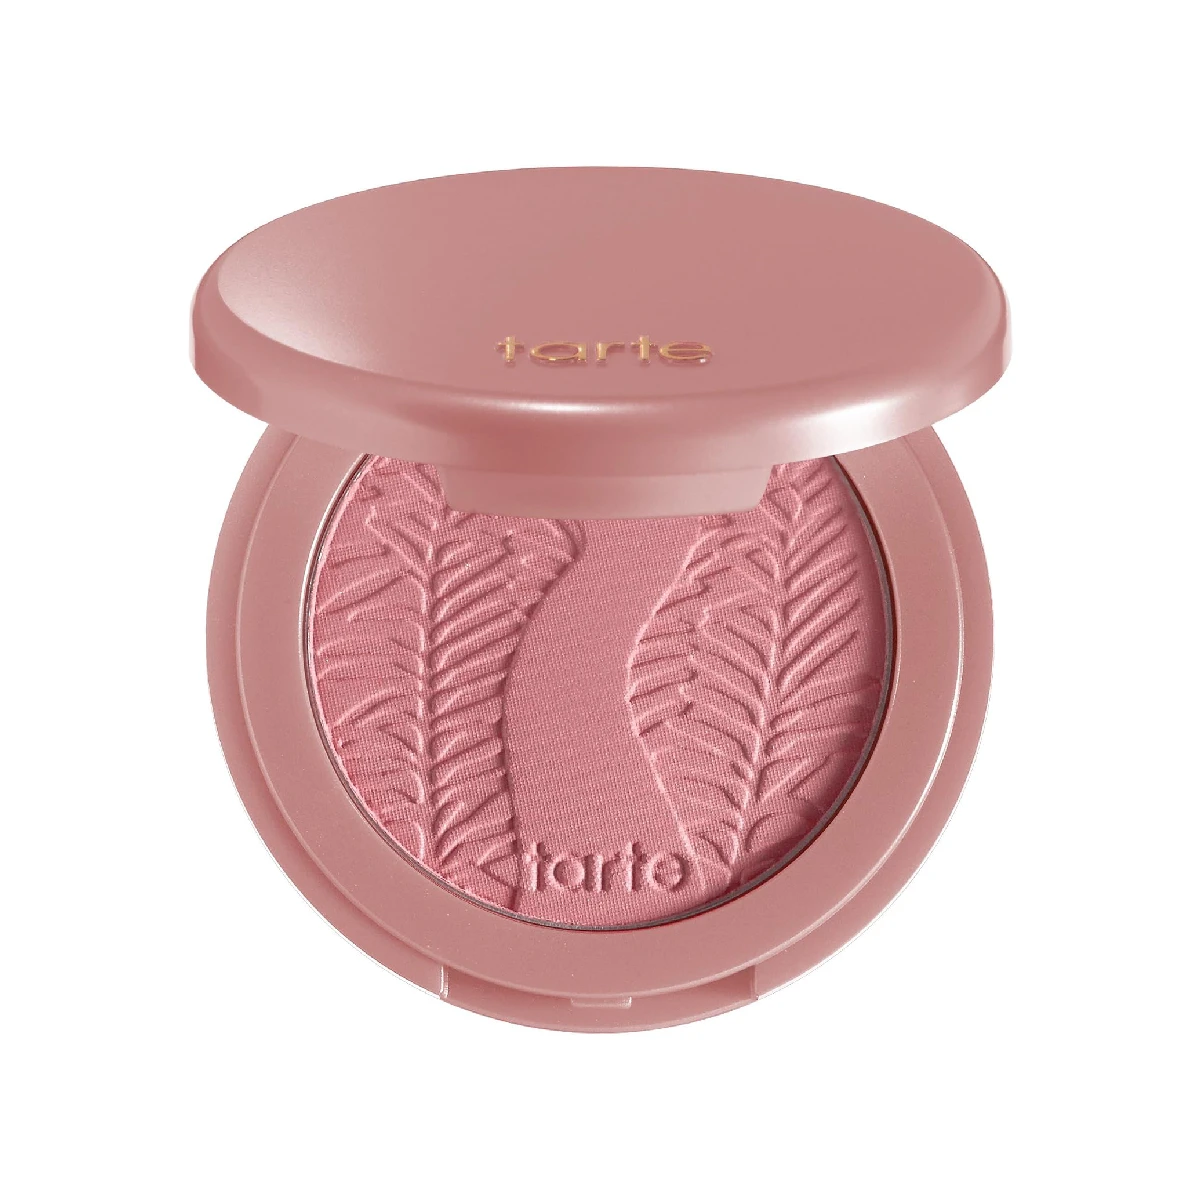 Tarte Amazonian Clay 12-Hour Blush - a blush compact on a white background.